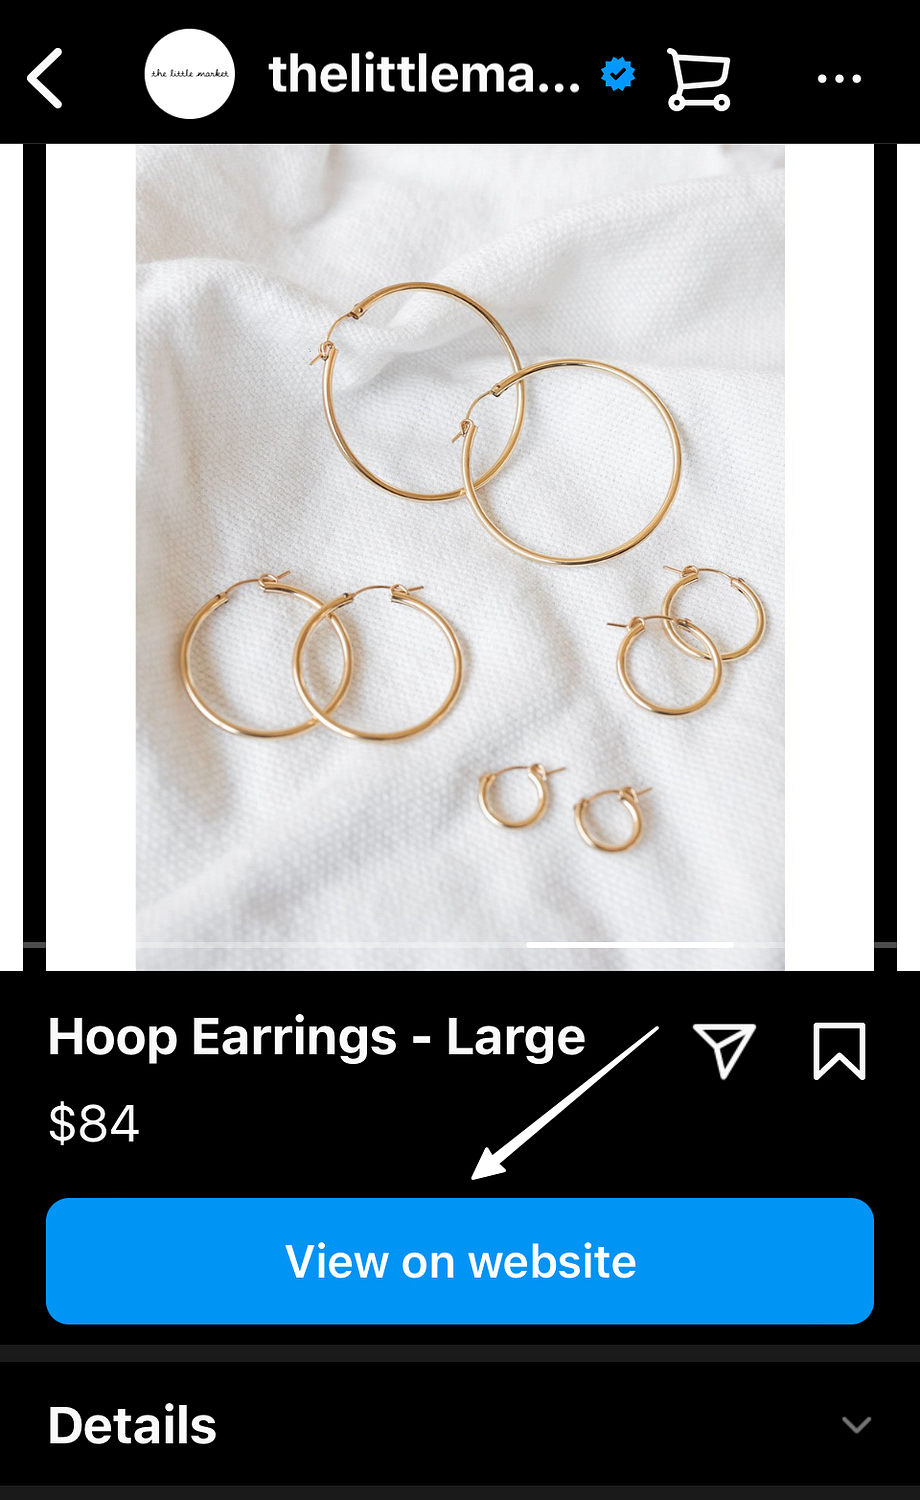 view on website button from Instagram Shoppable Posts